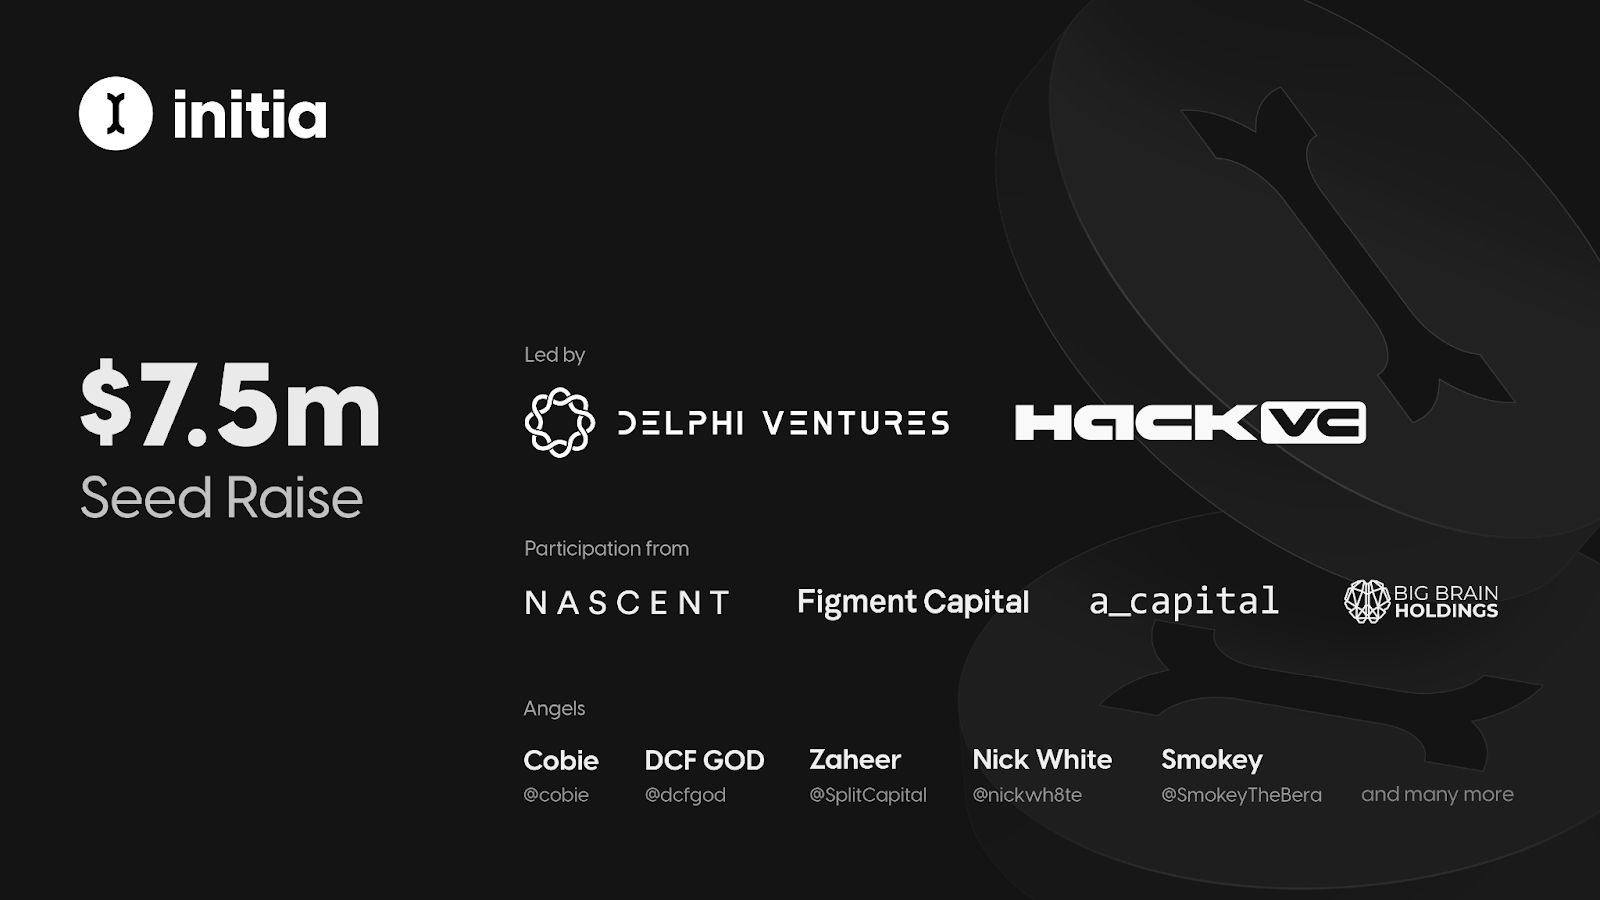 In addition to the Binance investment last October, on February 27th, 2024, it was announced that Initia had secured a seed funding round of 7.5 million from a host of leading crypto venture capital firms. Delphi Ventures and Hack VC led the round, with other notable contributors including Figment Capital, Nascent, a_capital, and Big Brain Holdings. Angel investors included the likes of pseudonymous crypto traders Cobie and DCF God as well as Celestia COO Nick White, Split Capital co-founder Zaheer Ebtikar, and even pseudonymous Berachain co-founder SmokeyTheBera. (Image Credit: Initia Twitter post via Initia Twitter)